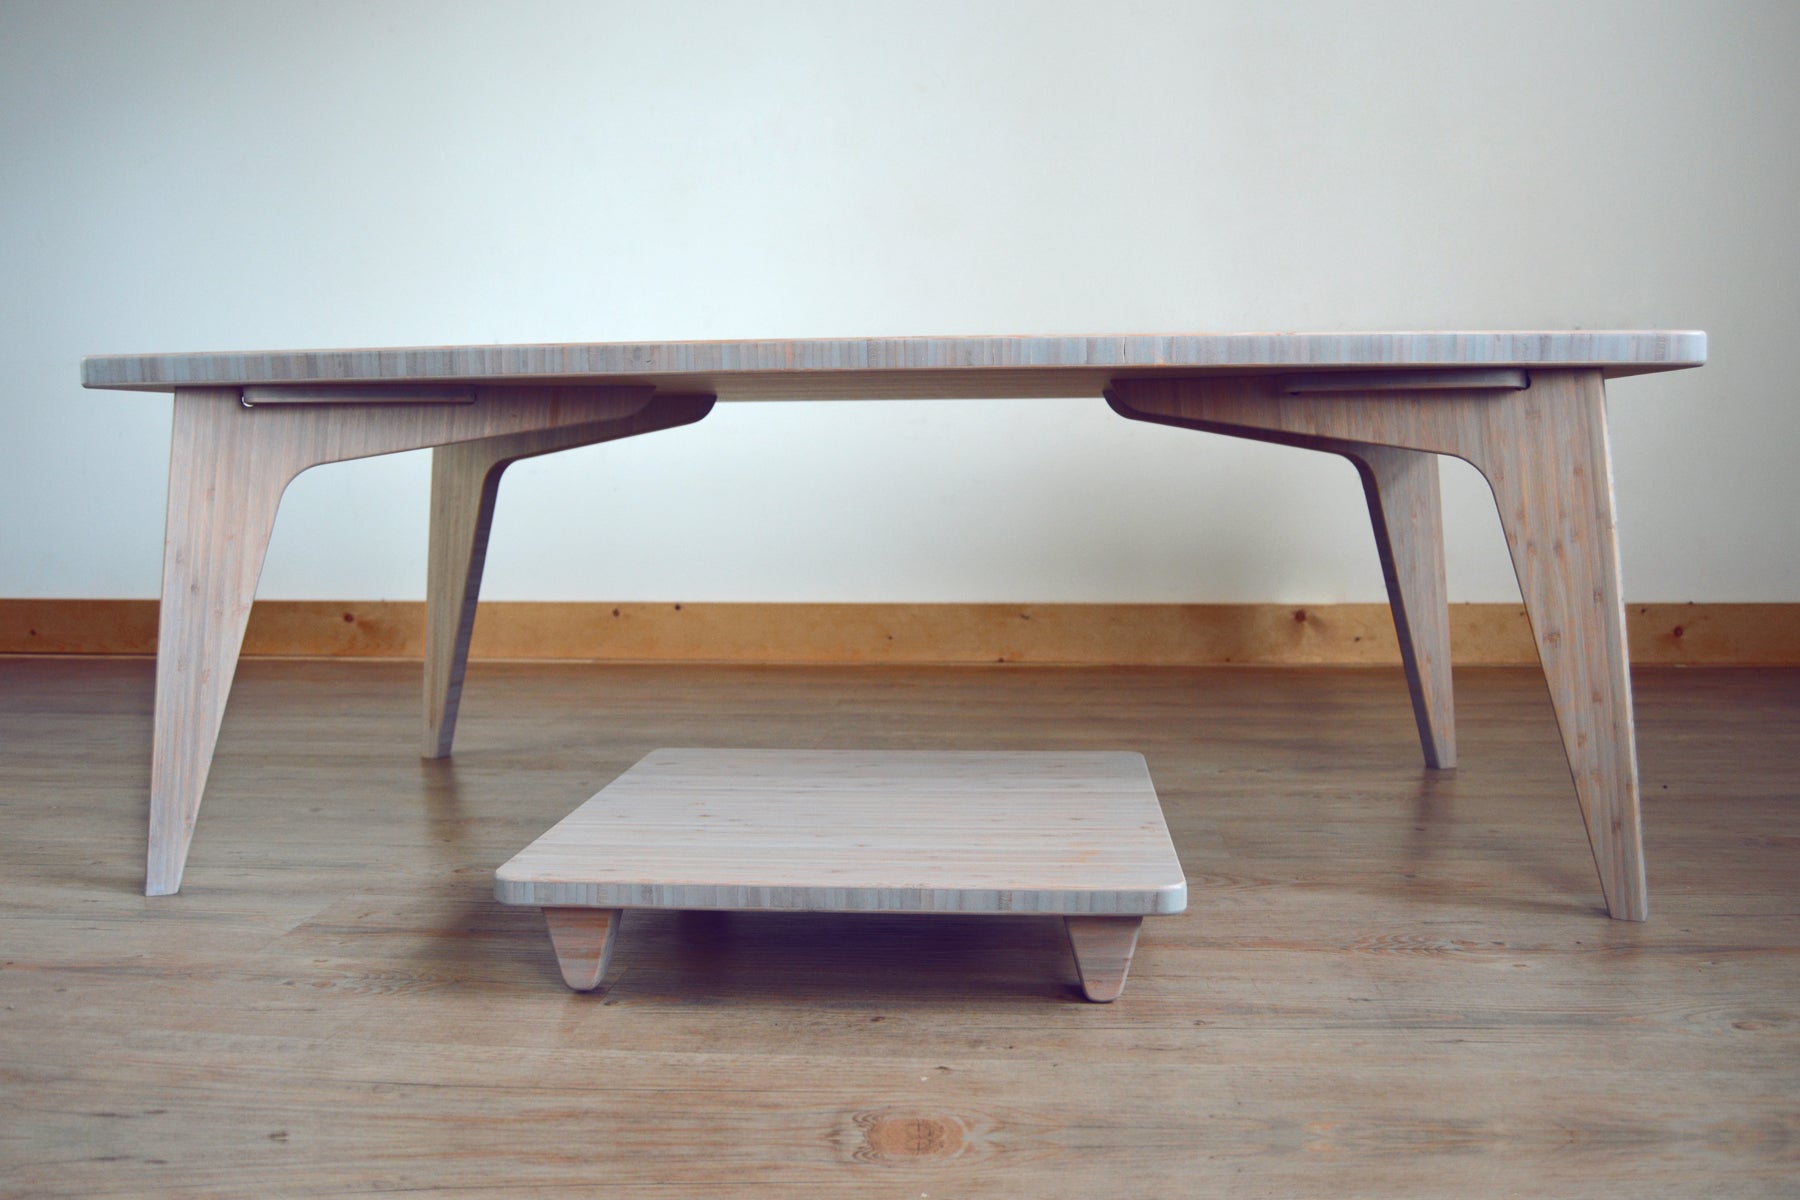 Grey bamboo table with pillow lift. Japanese, mid-century, Scandinavian and contemporary inspired. Sustainable wood alternative, made from solid grass.